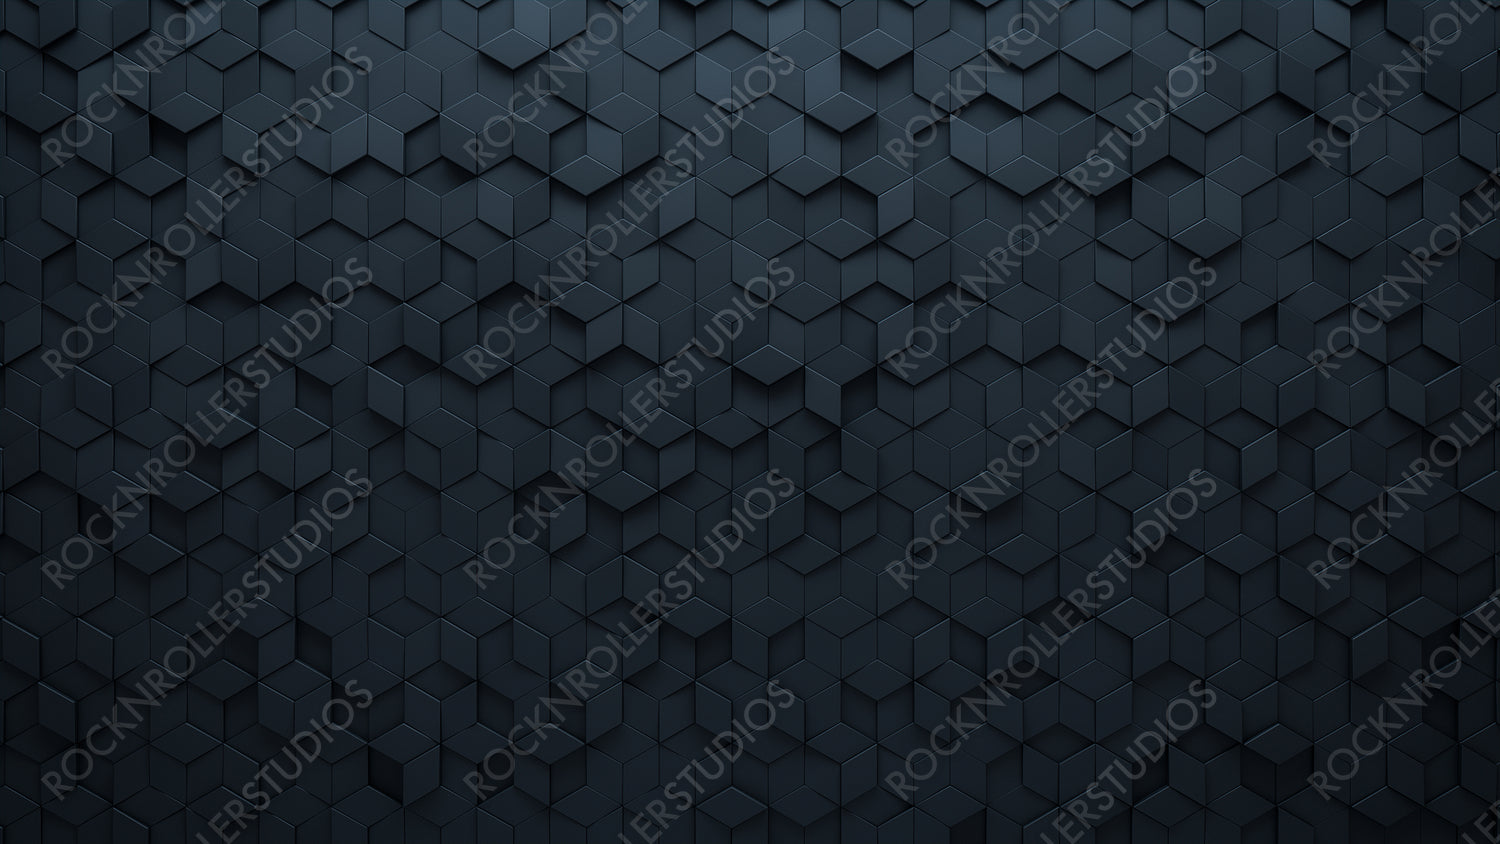 Polished Tiles arranged to create a Futuristic wall. Black, 3D Background formed from Diamond Shaped blocks. 3D Render